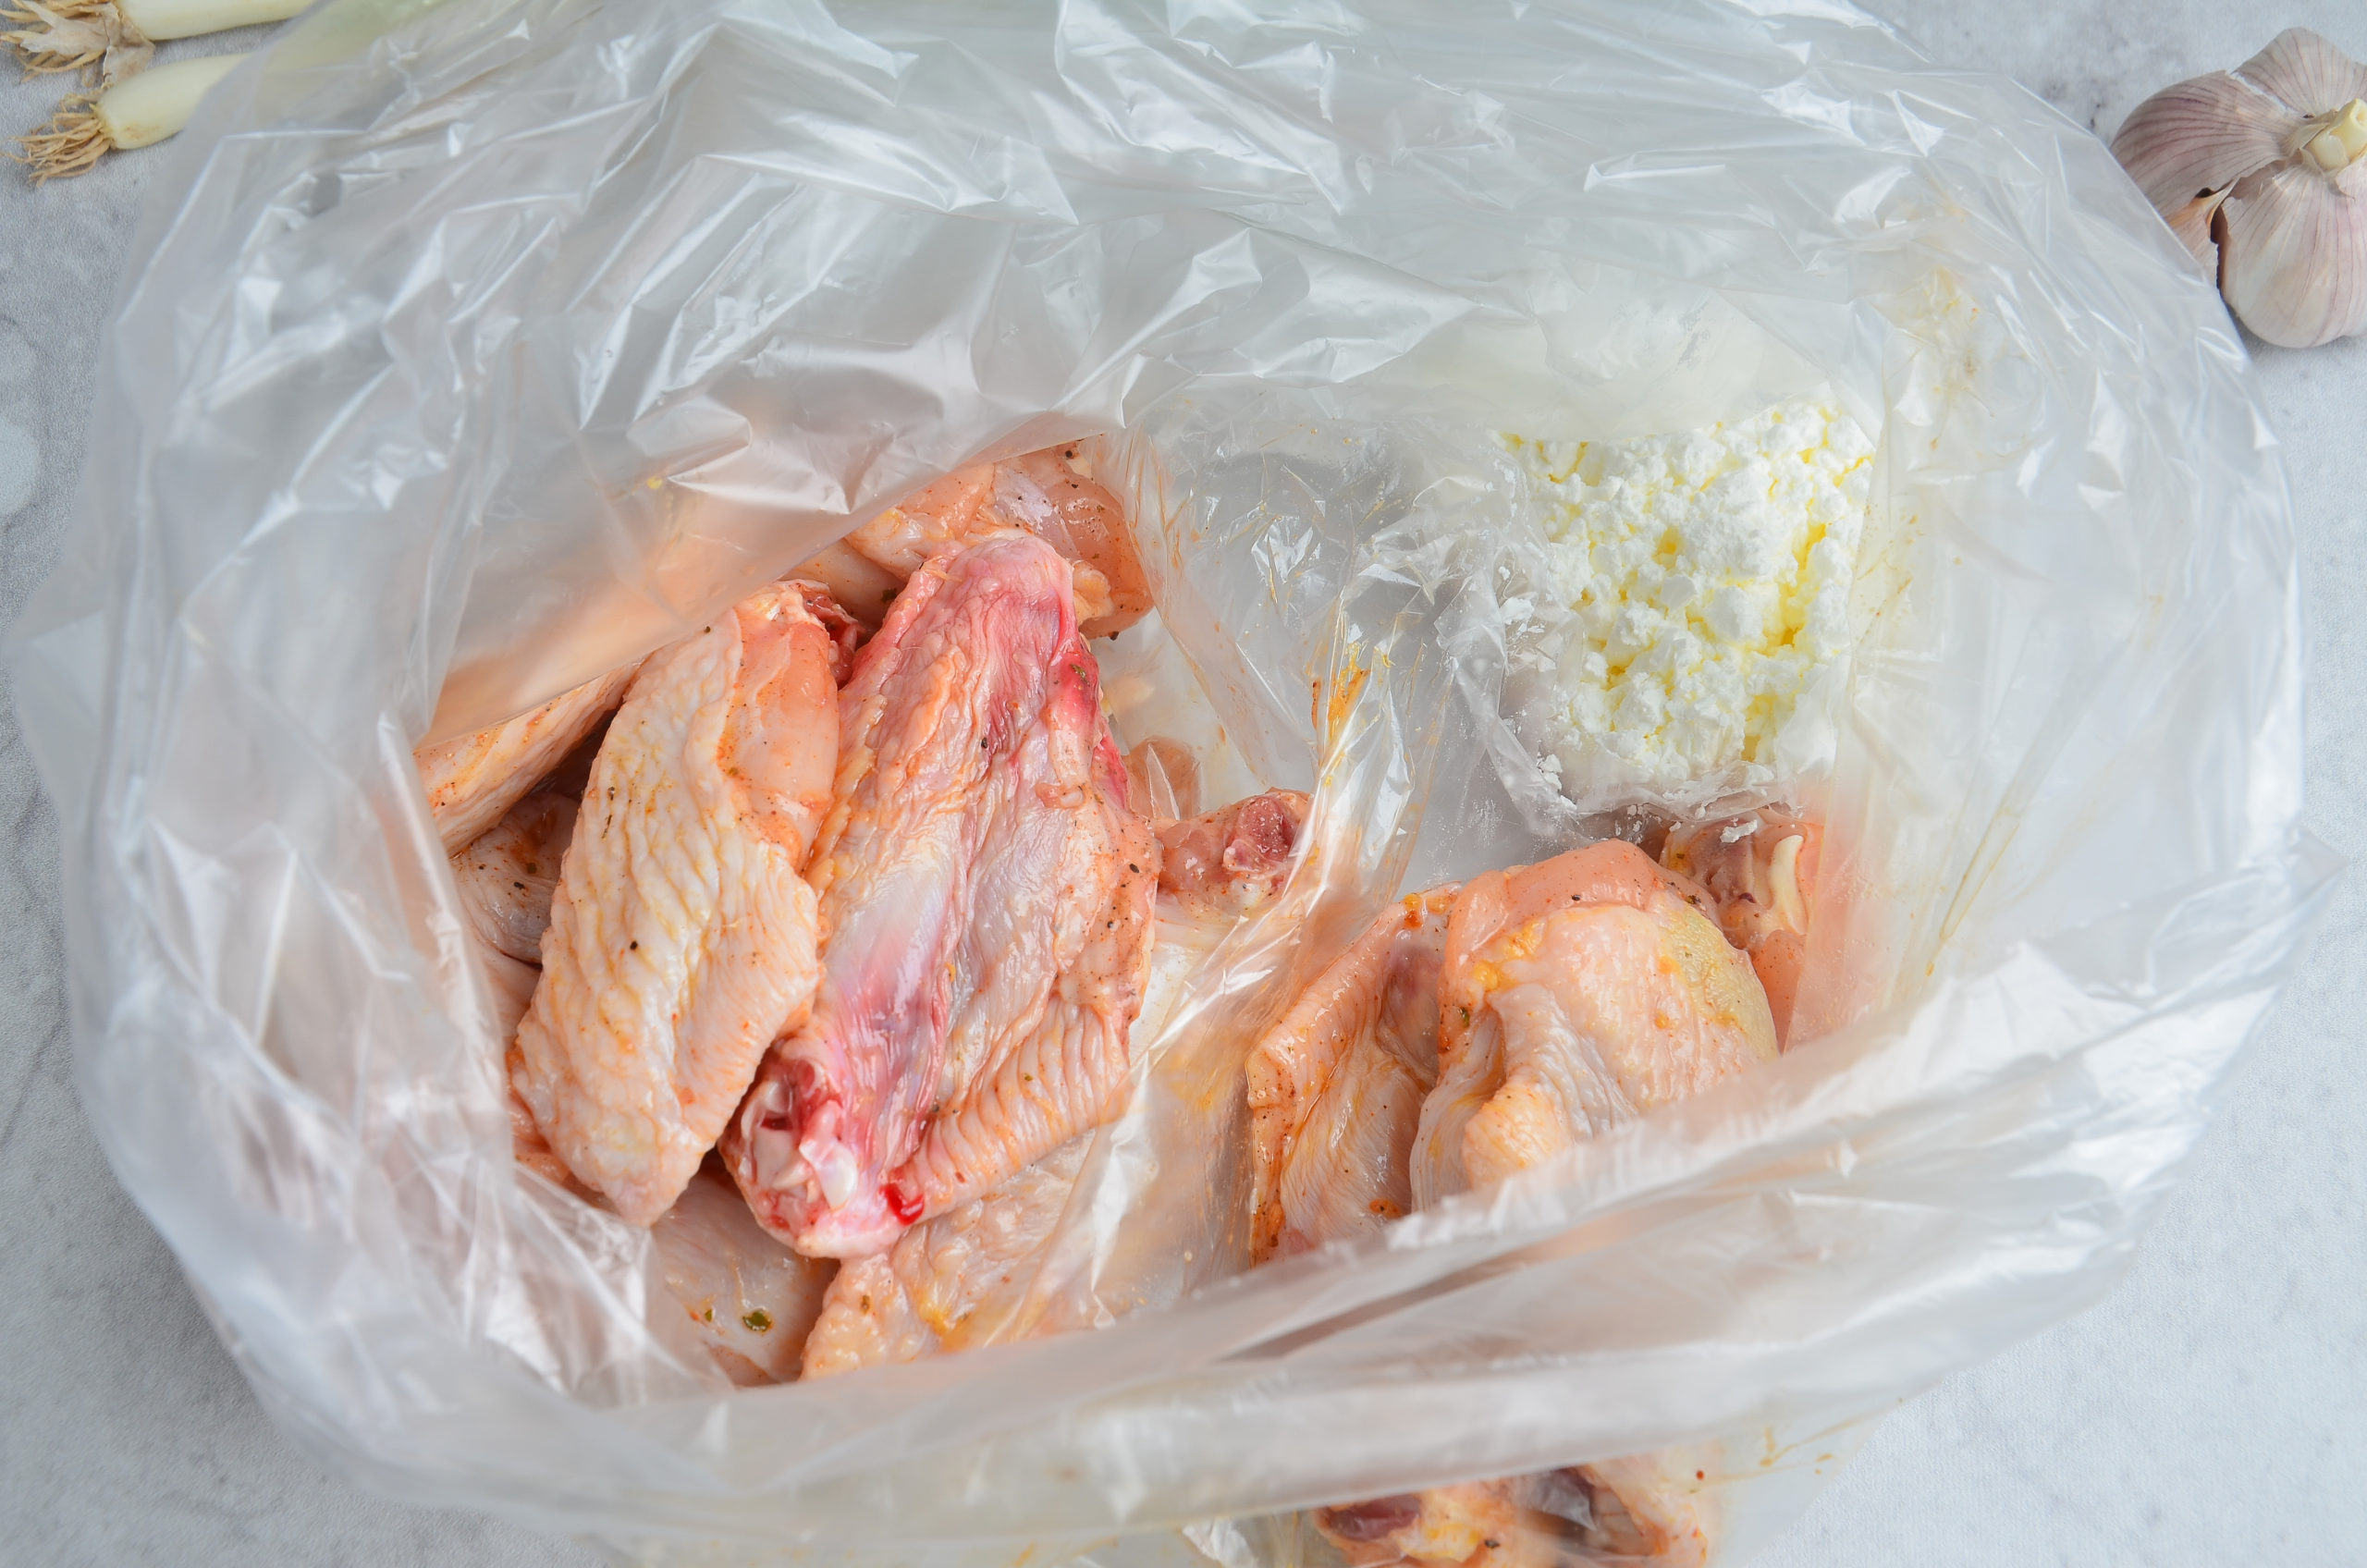 Marinated wings with starch in a plastic bag